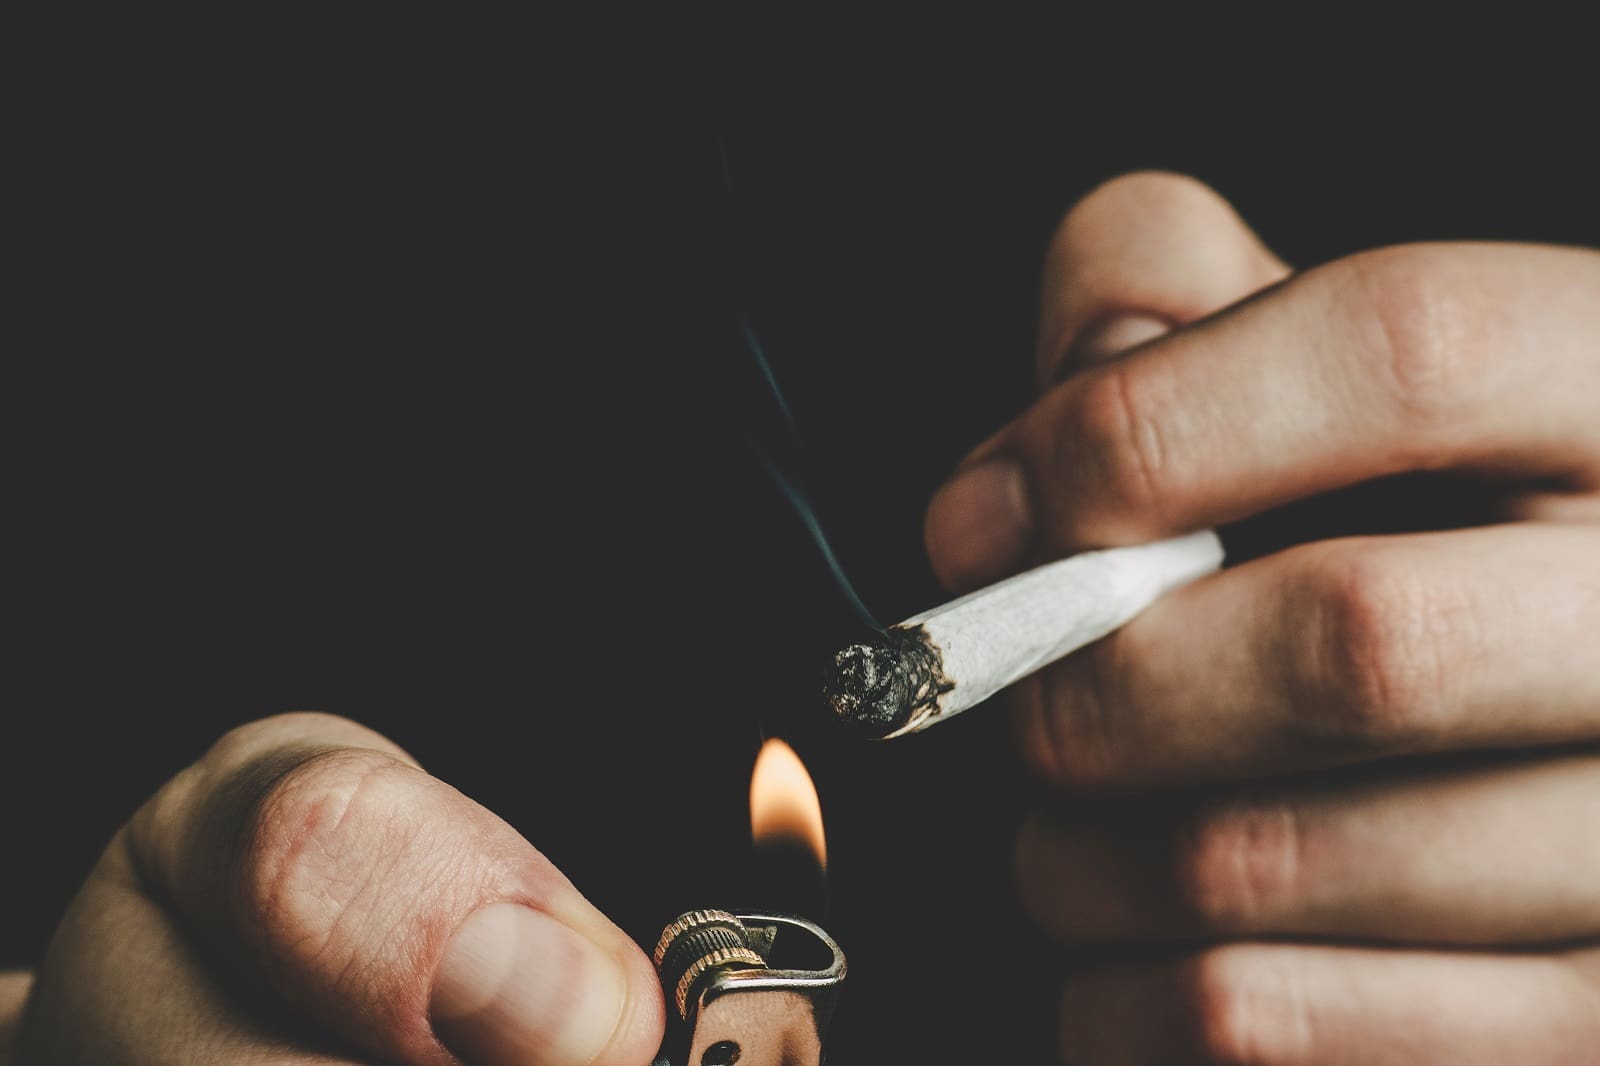 What are the dangers of smoking weed?